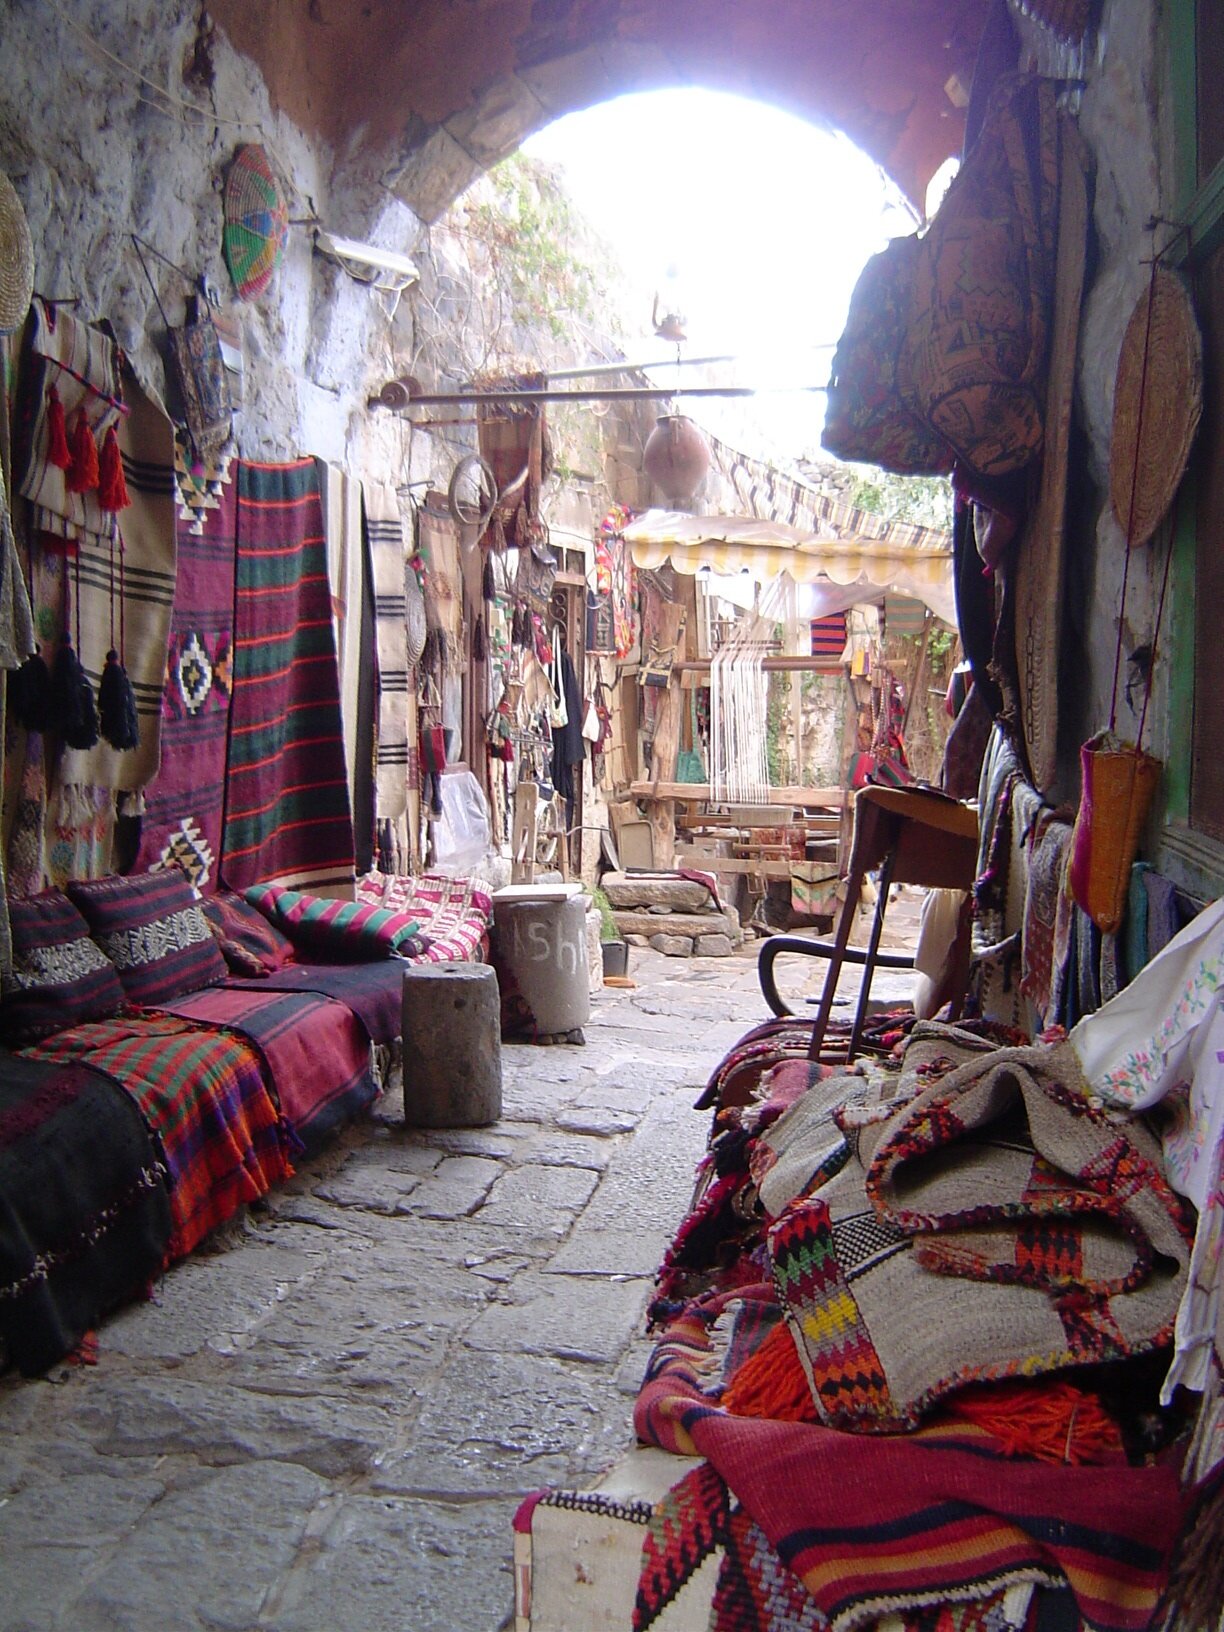   DAMASCUS, Syria. October 2007. PICTURED:  A narrows merchant’s stall typical of the area around  Bab Thouma  in the Old City.  